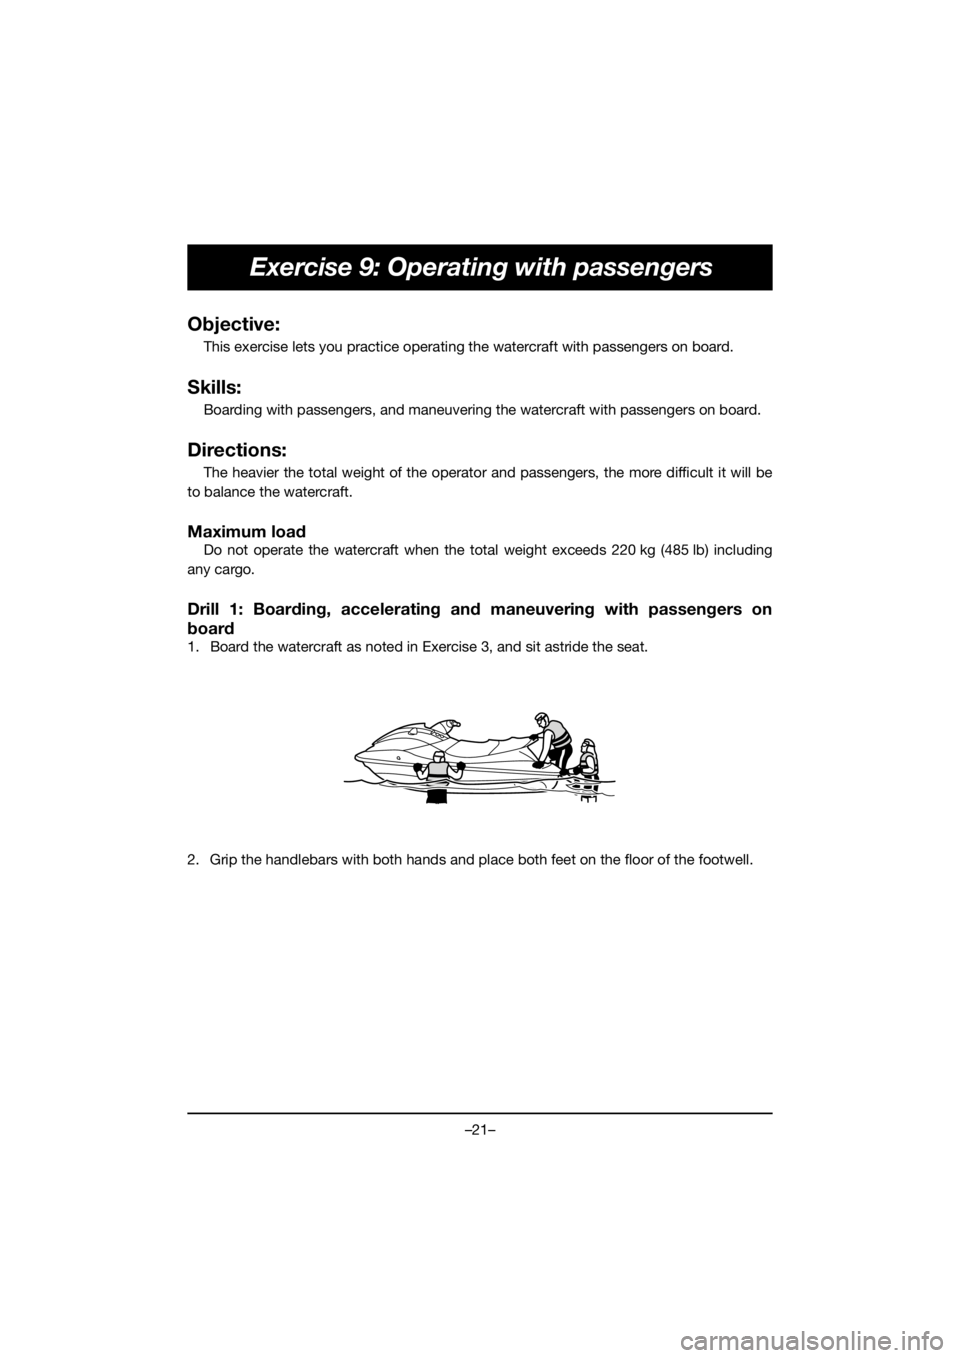 YAMAHA EX SPORT 2019  Manuale de Empleo (in Spanish) –21–
Exercise 9: Operating with passengers
Objective:
This exercise lets you practice operating the watercraft with passengers on board.
Skills:
Boarding with passengers, and maneuvering the water